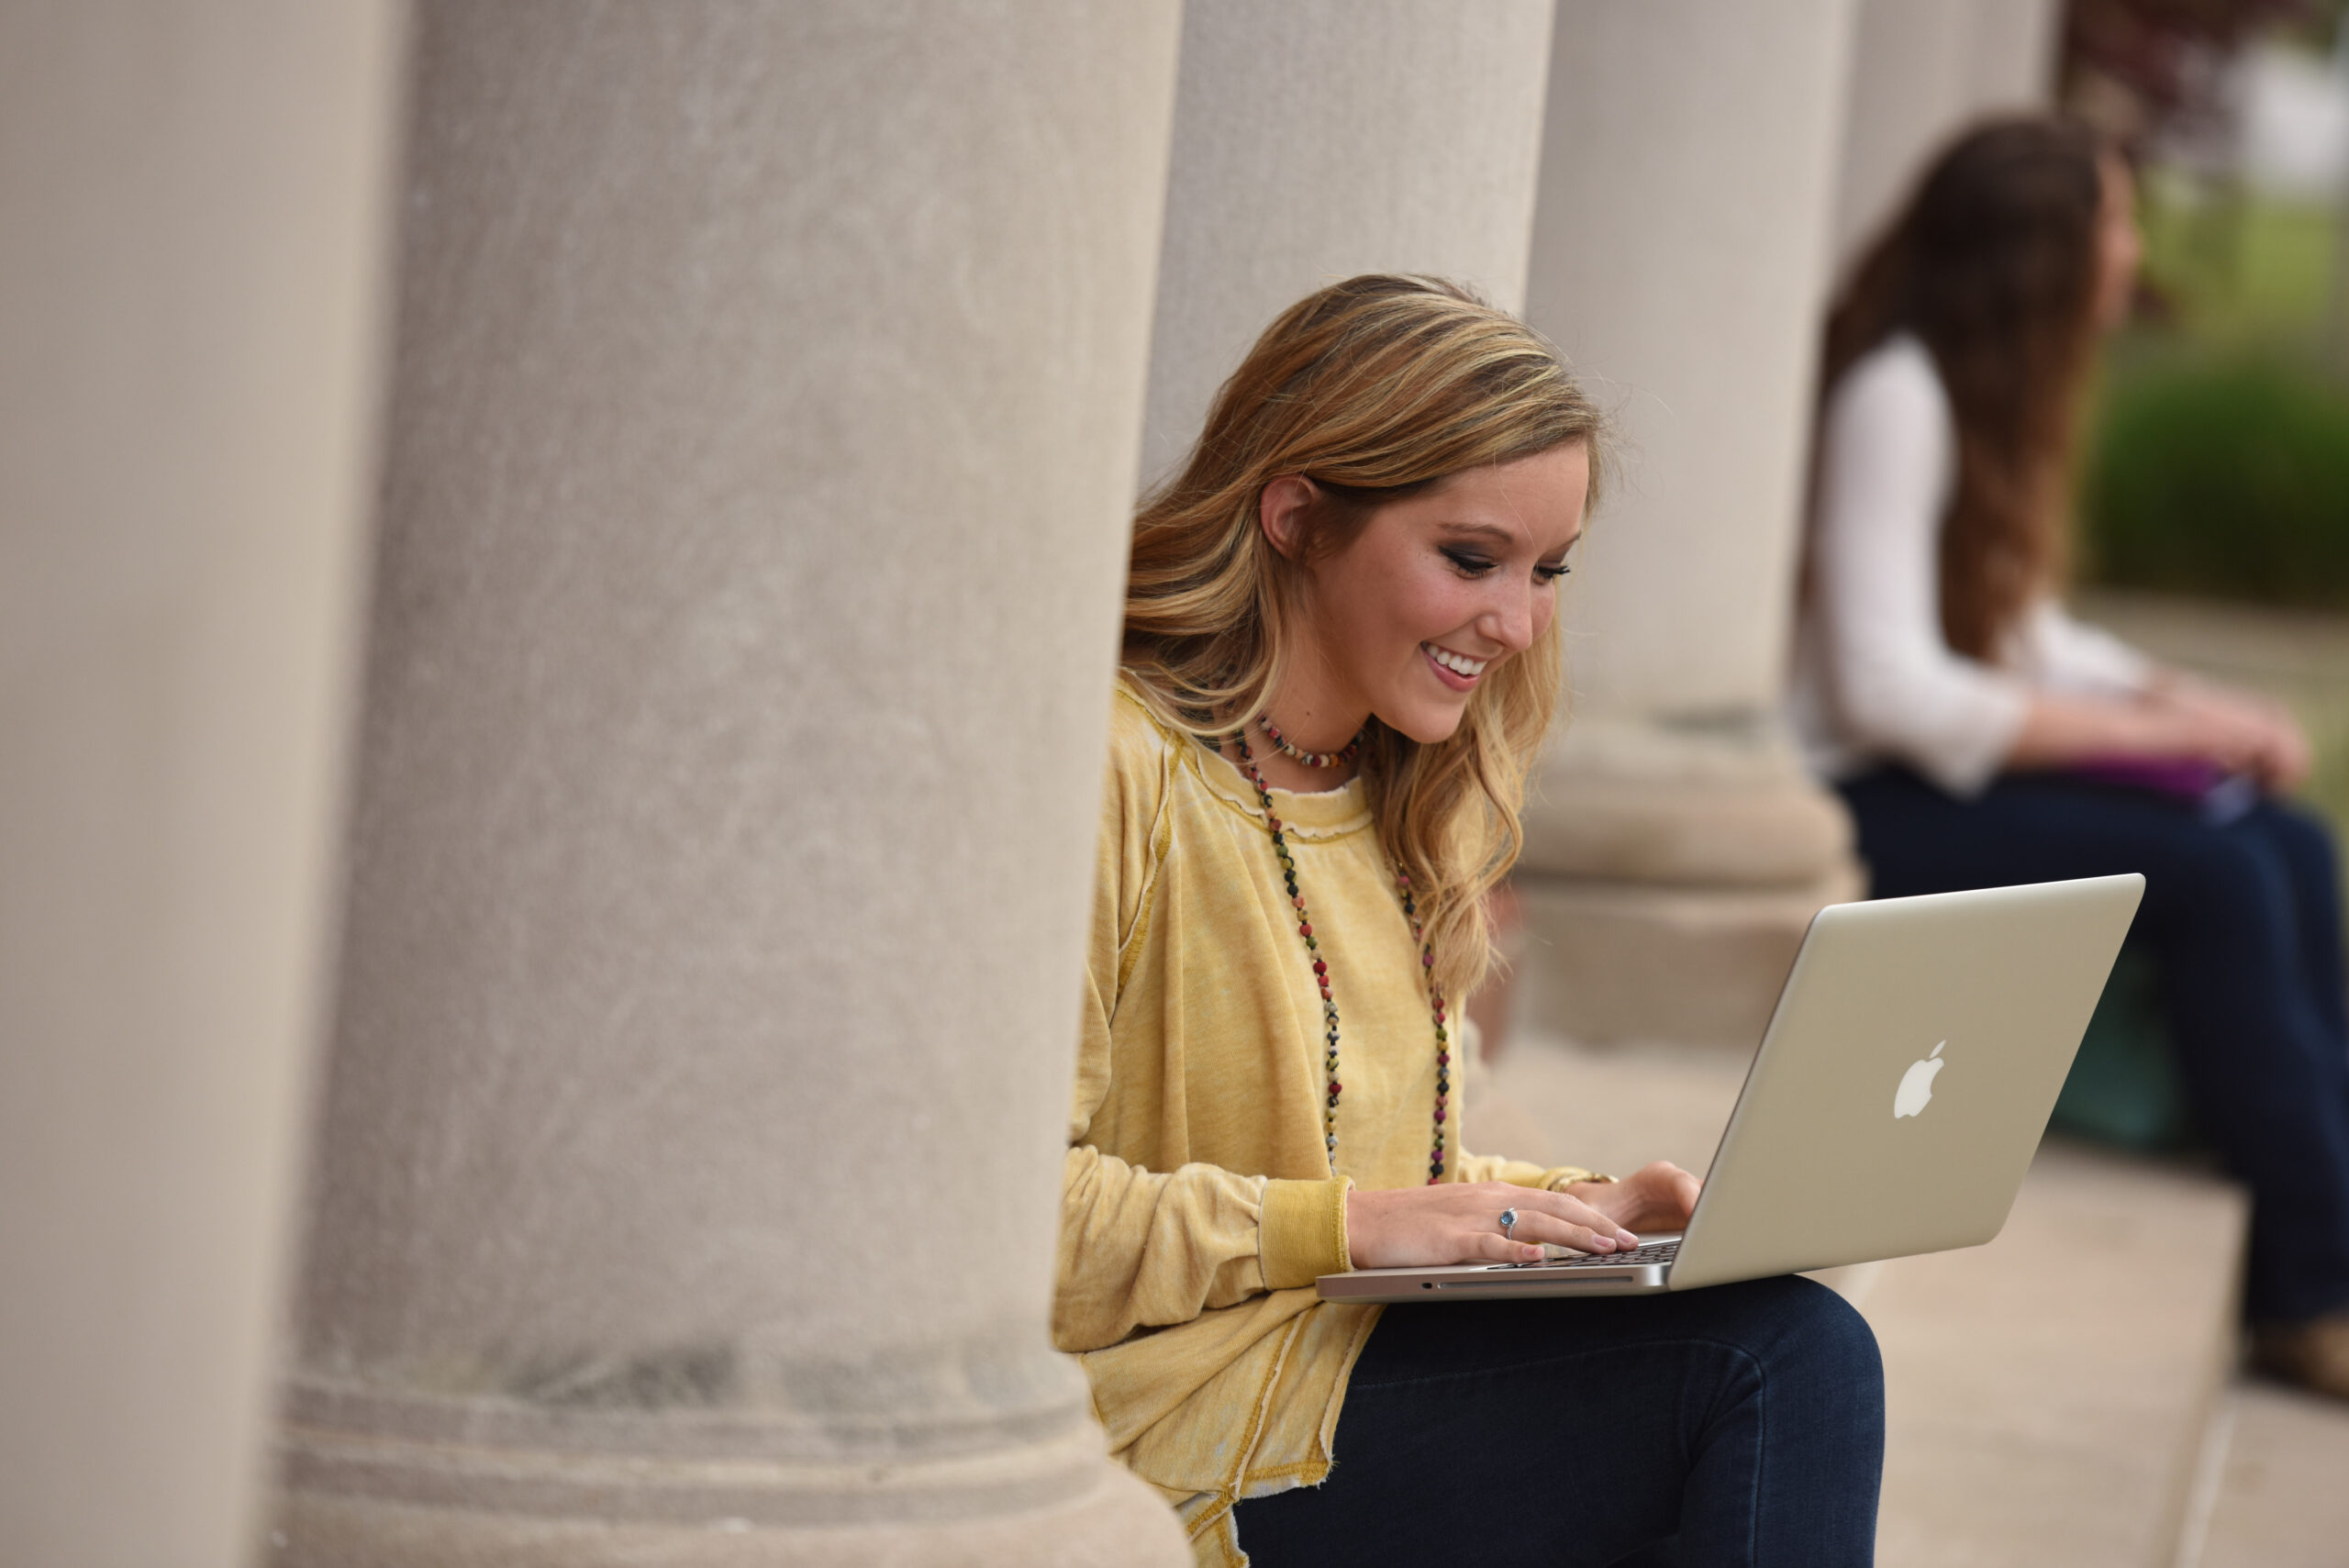 Student in a yellow shirt typing on her laptop while smiling.